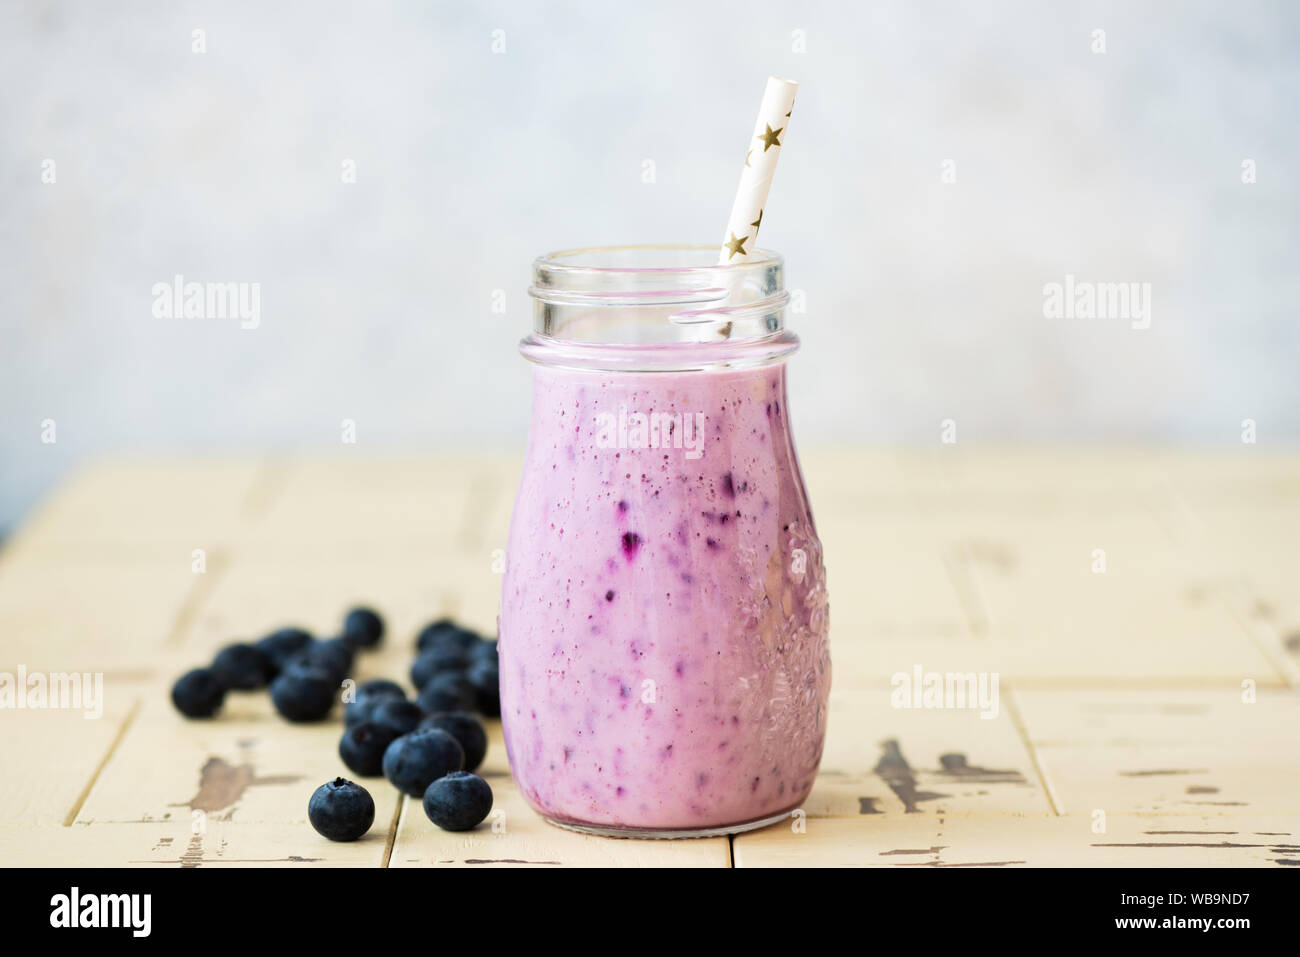 Blended blueberry smoothie in glass with a drinking straw. Healthy refreshing vitamin drink Stock Photo